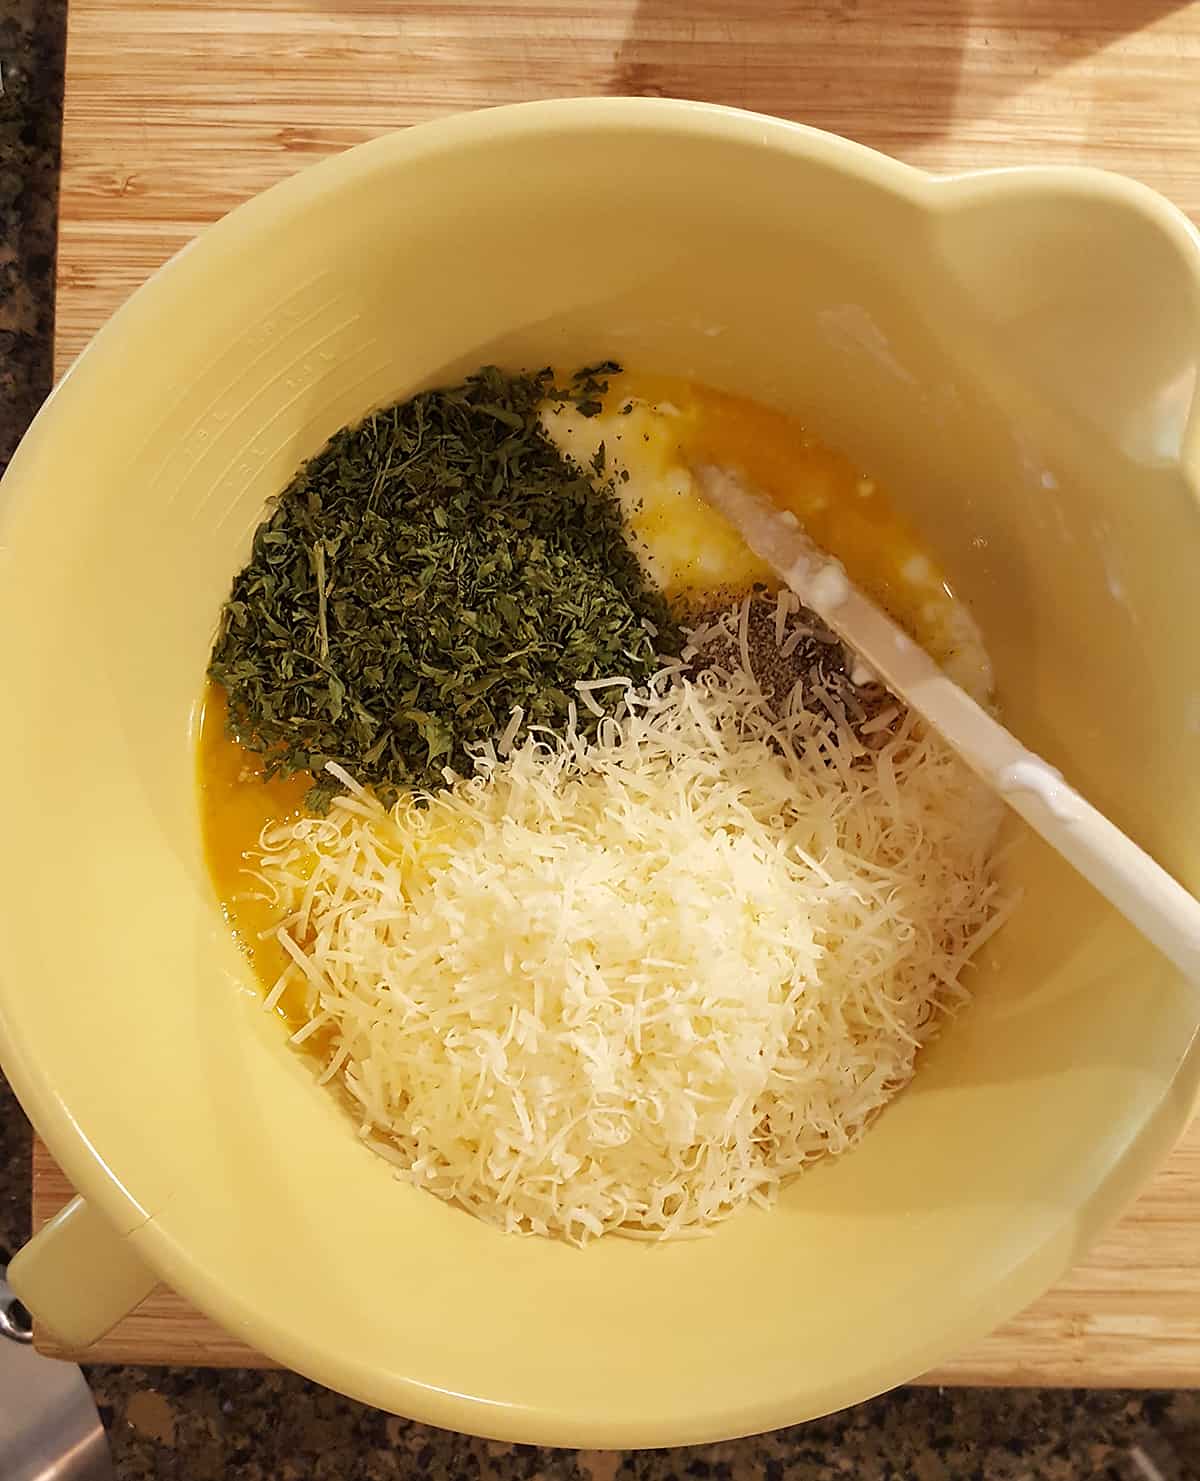 Mixing bowl holding the filling ingredients of cottage cheese, eggs, parsley, and Parmesan cheese.